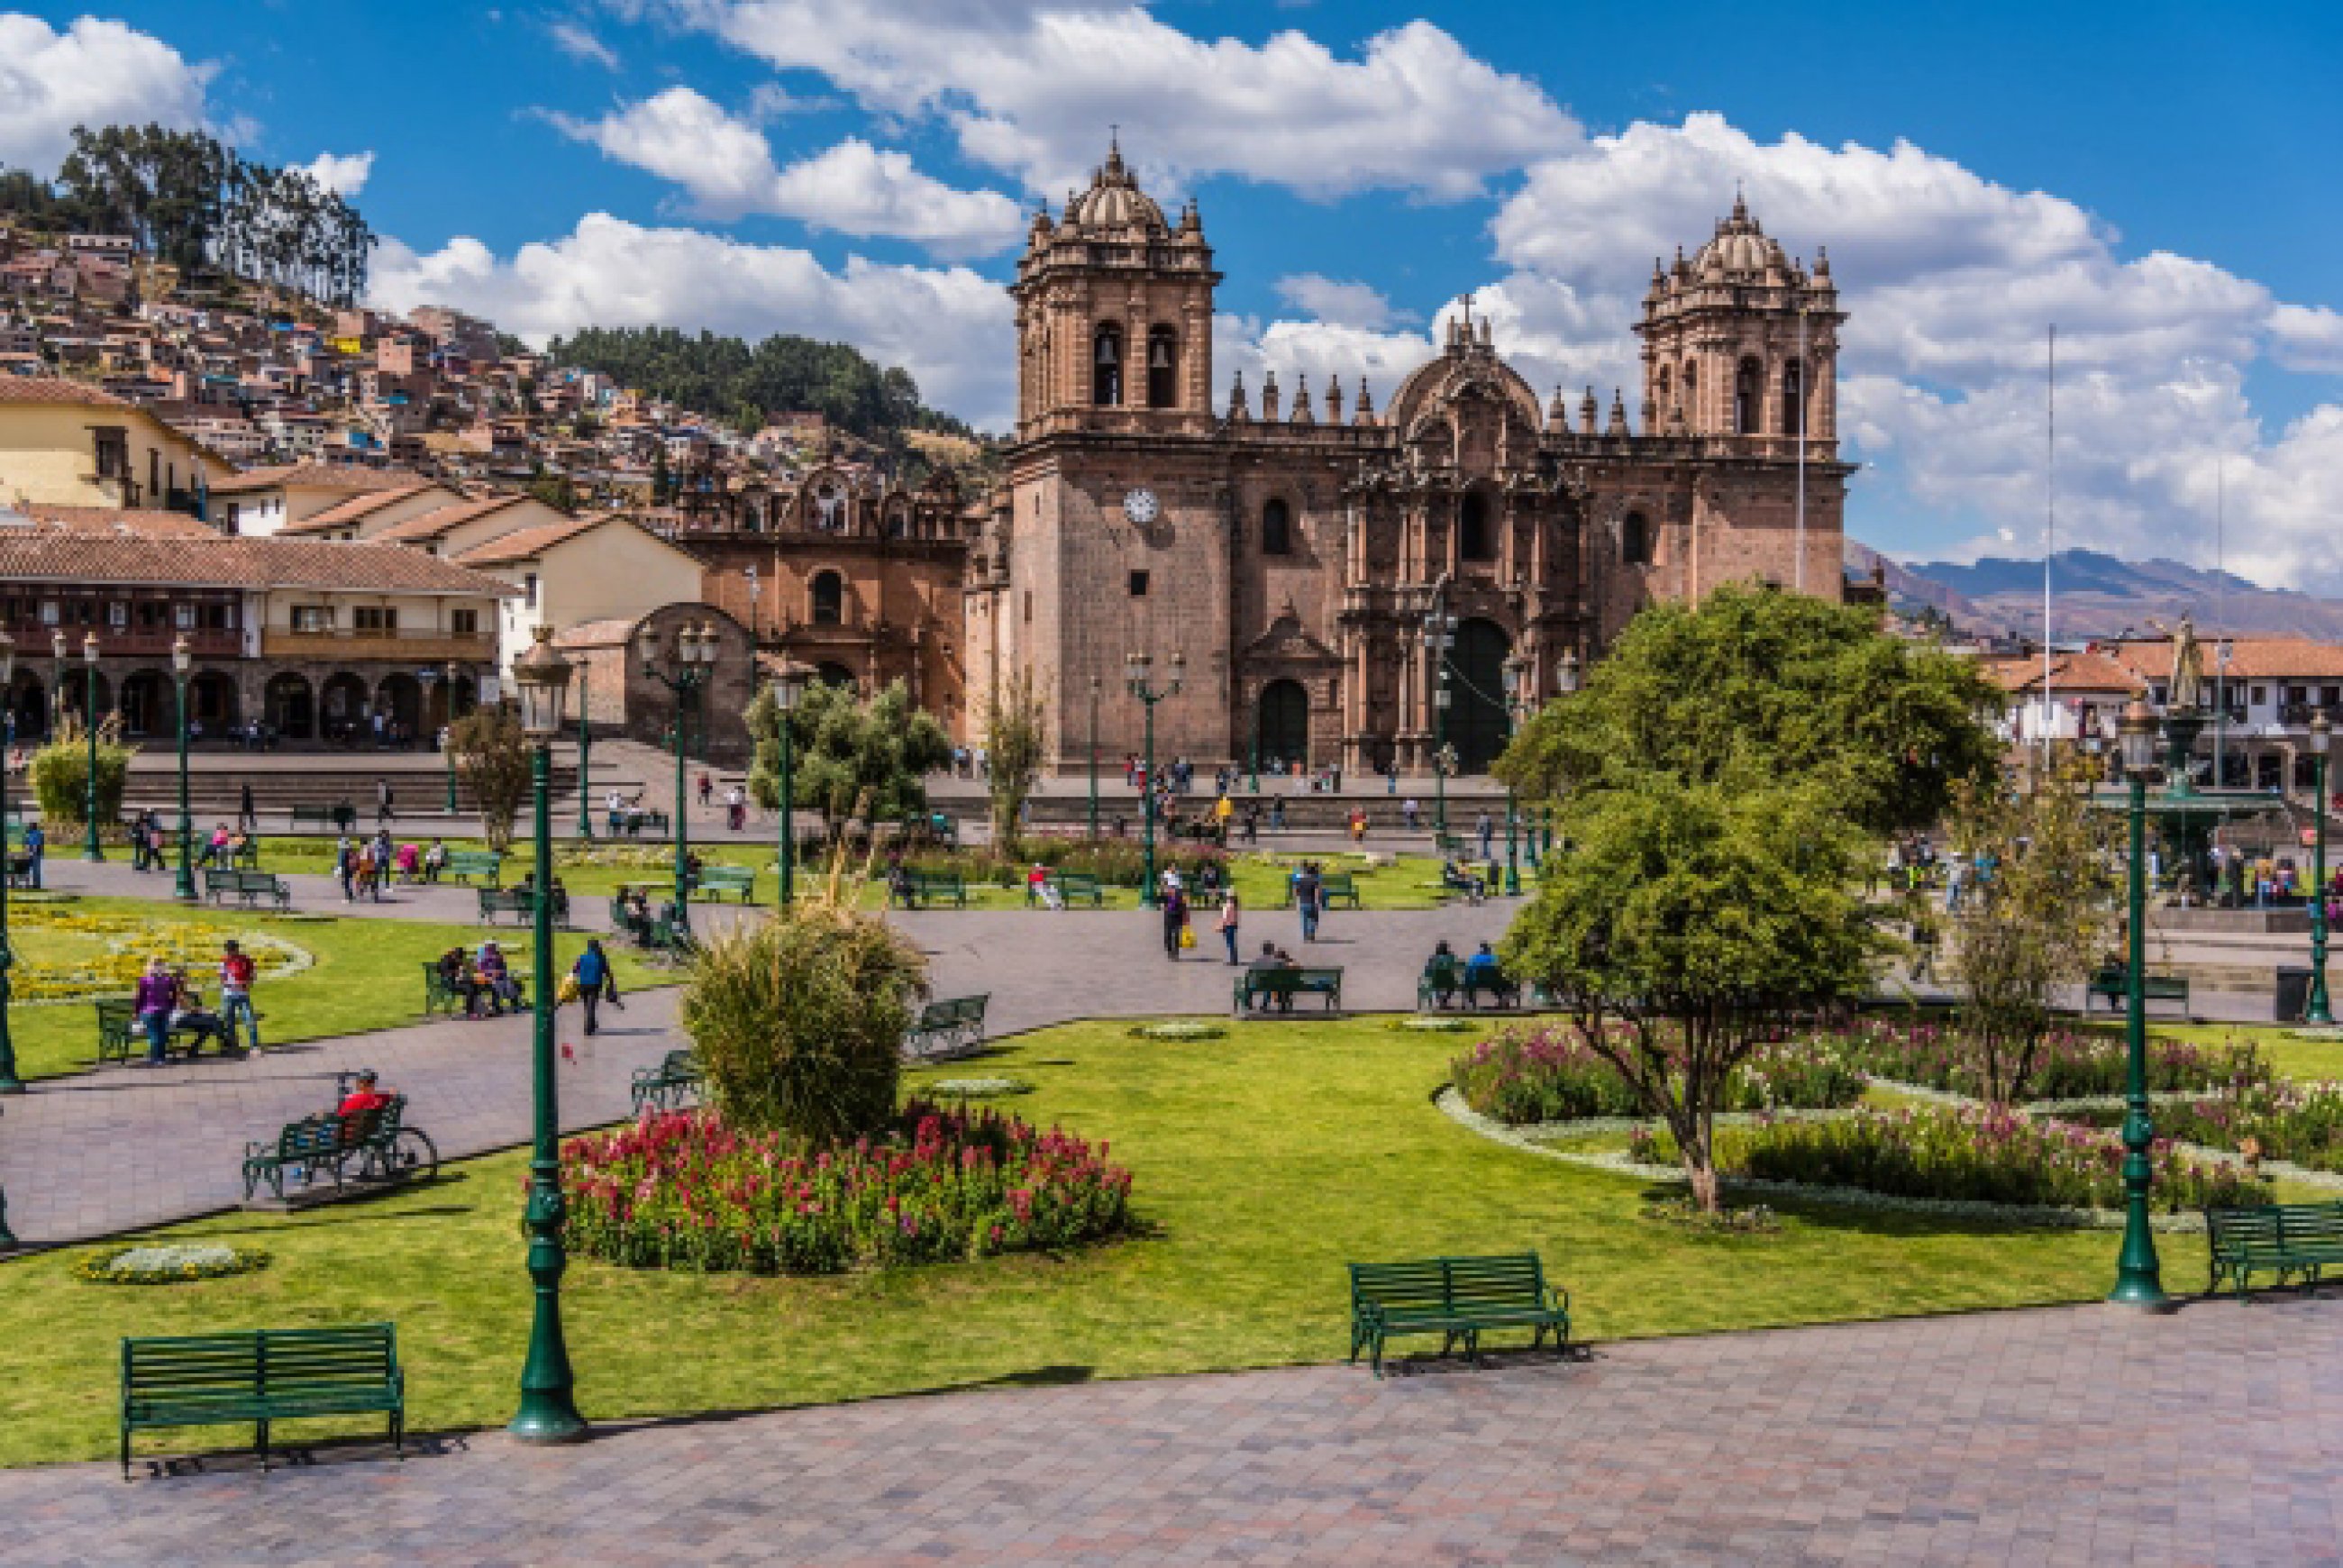 https://bubo.sk/uploads/galleries/7430/cuzco-peru-panoramic-view-of-the-main-square-an-the-cathedral-church.jpg